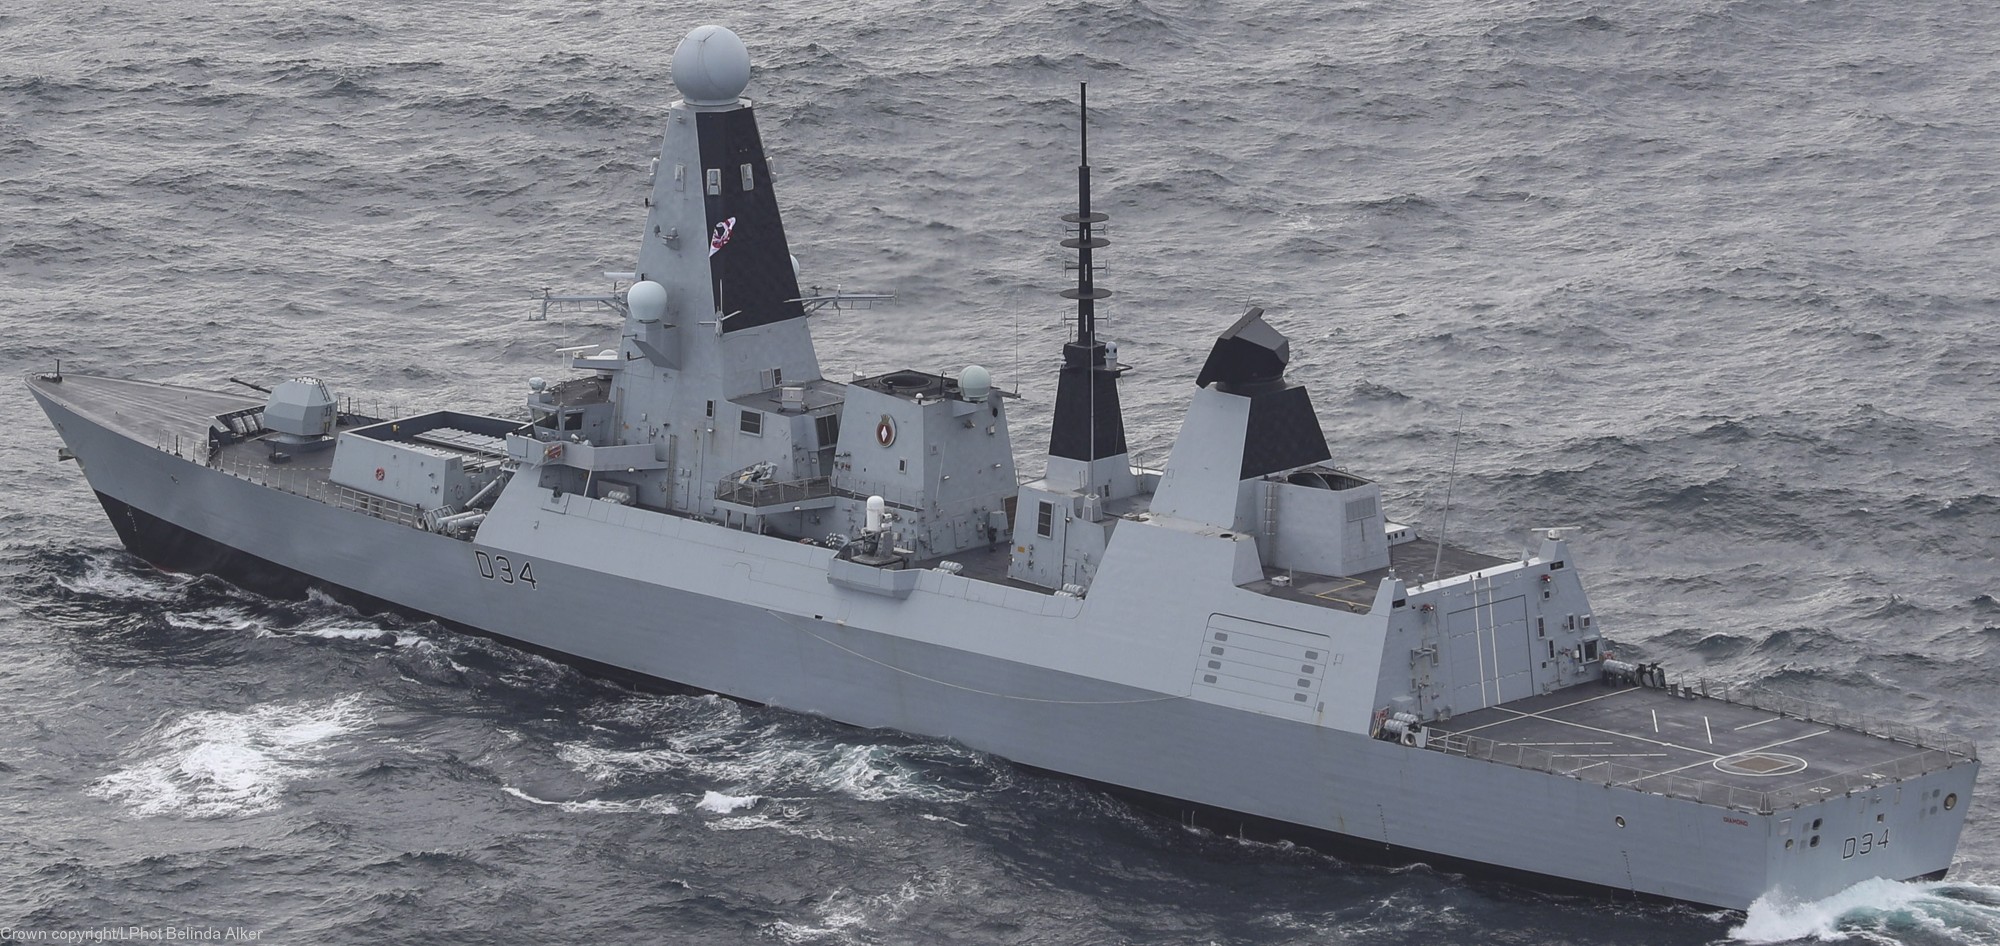 d34 hms diamond d-34 type 45 daring class guided missile destroyer ddg royal navy sea viper paams 44